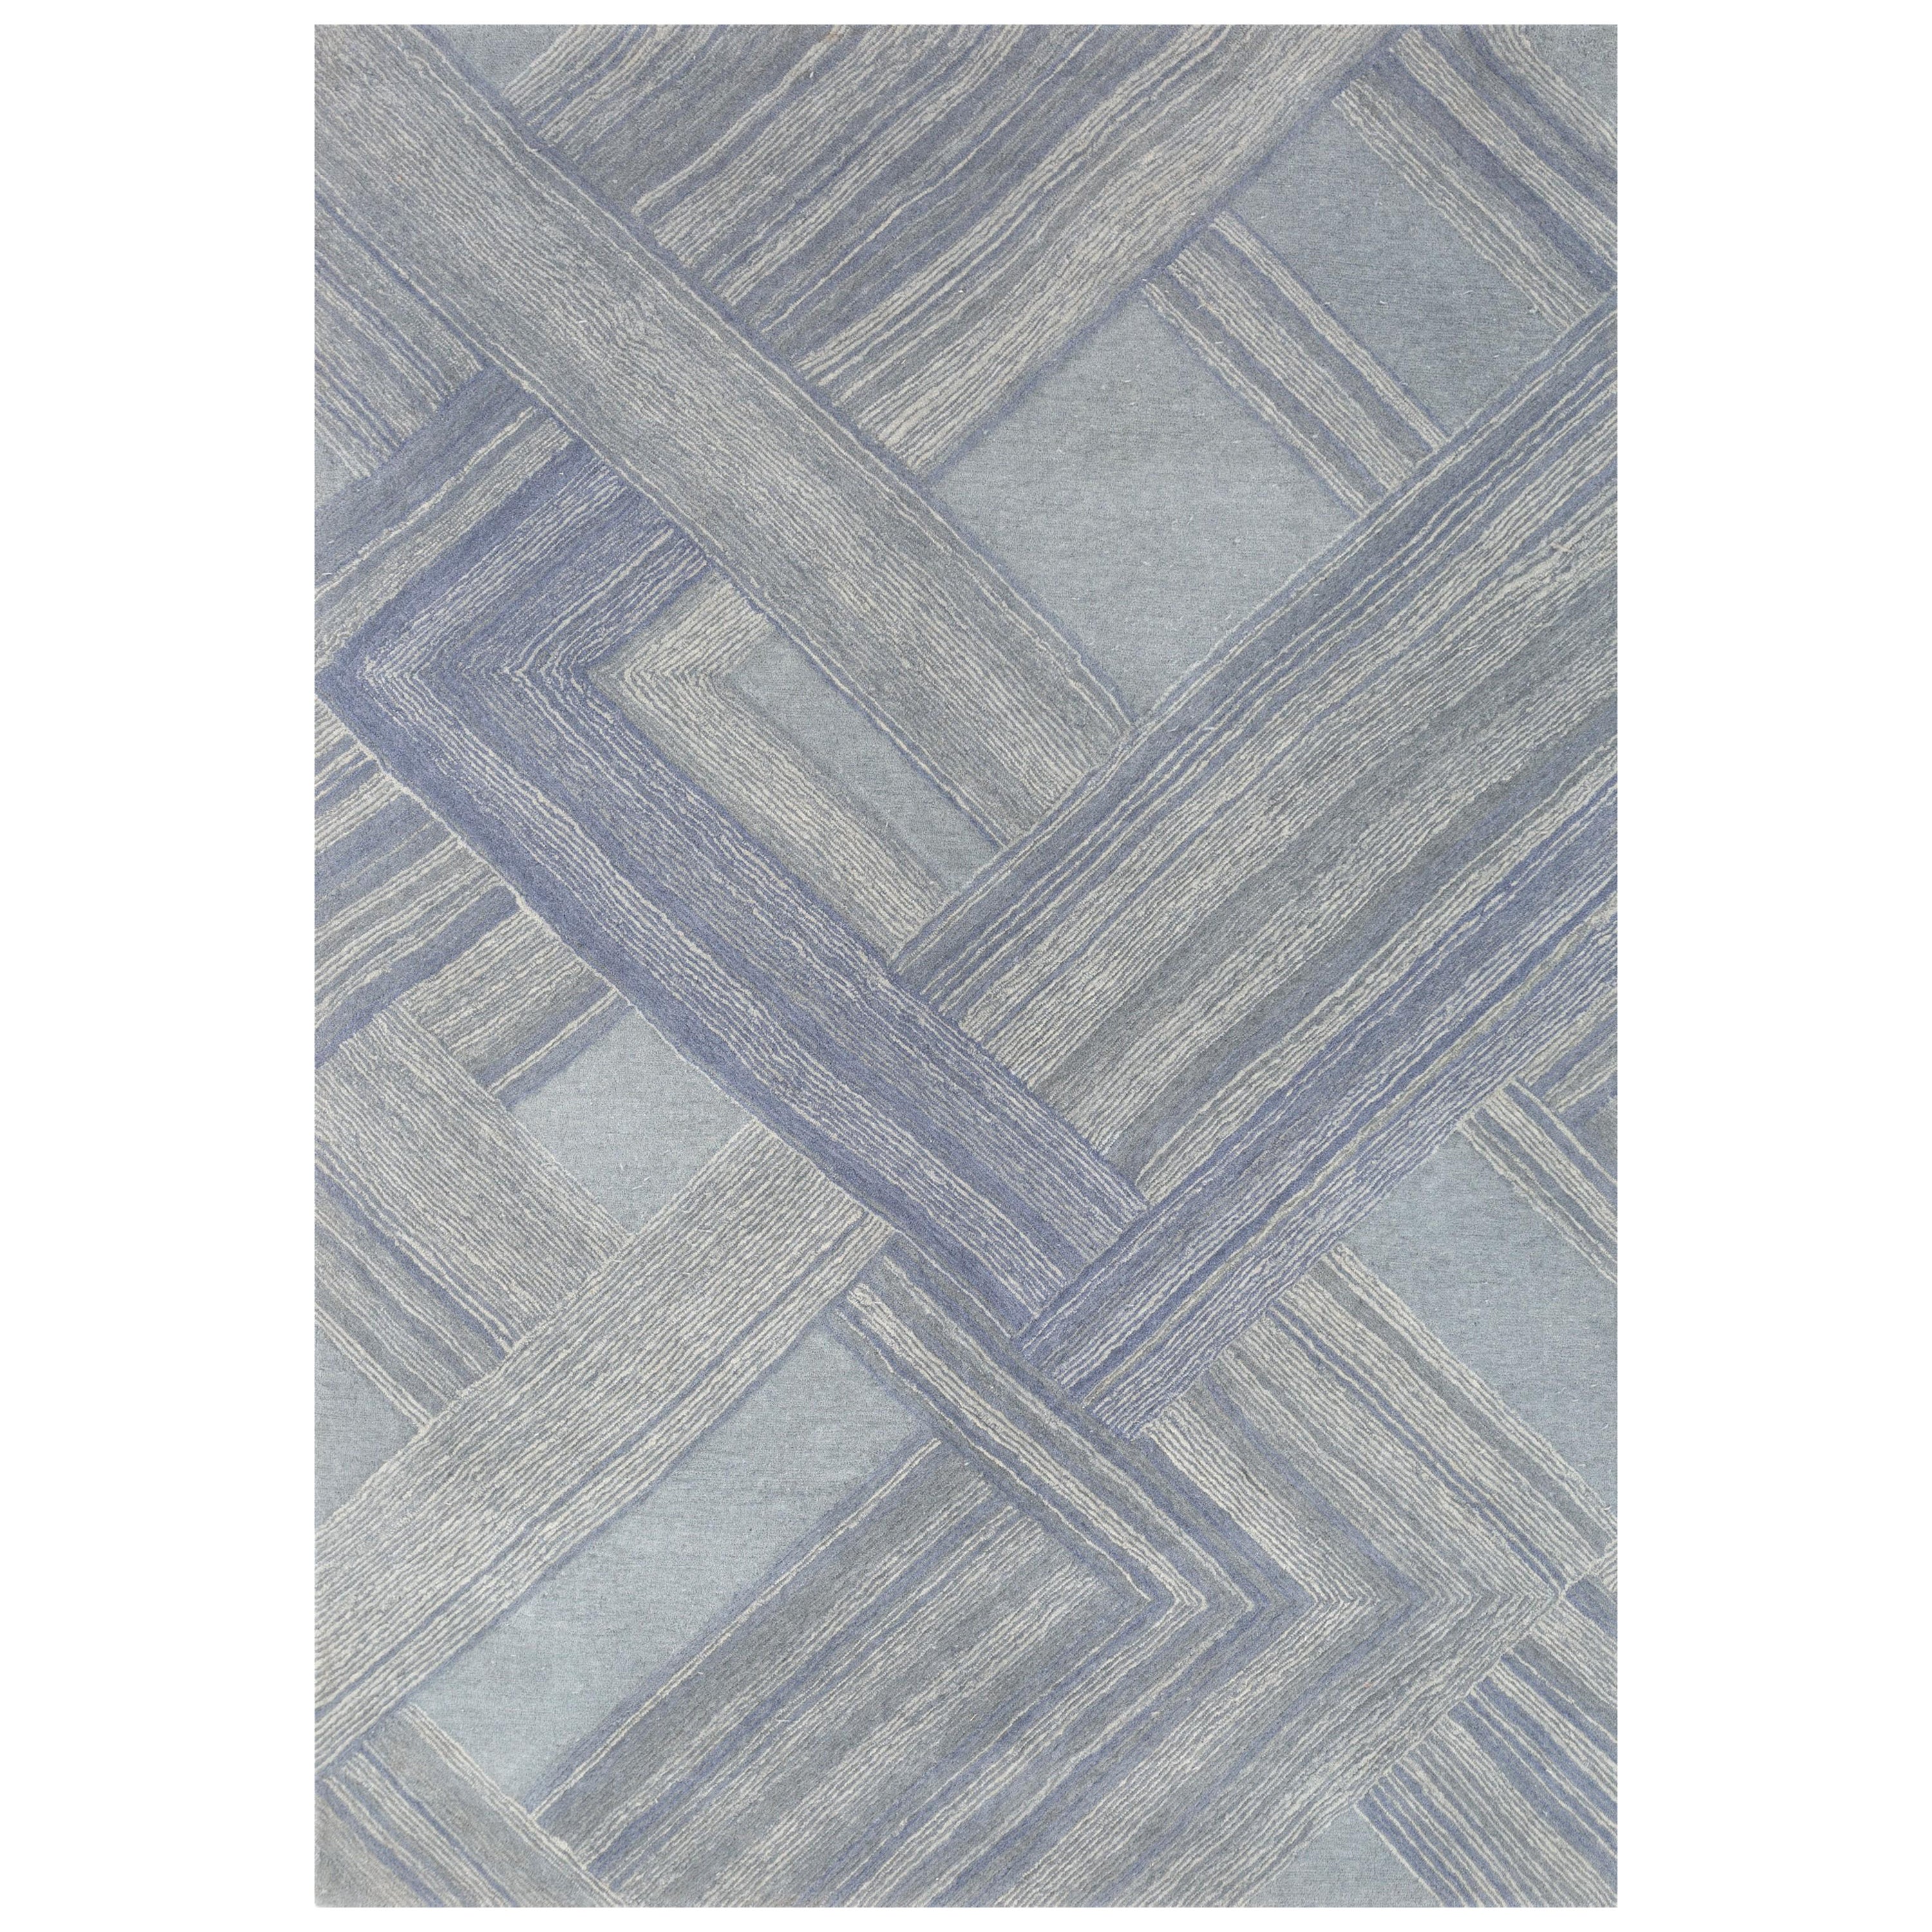 Chevron Tranquility Trooper Tapestry 180x270 cm Hand Tufted Rug For Sale